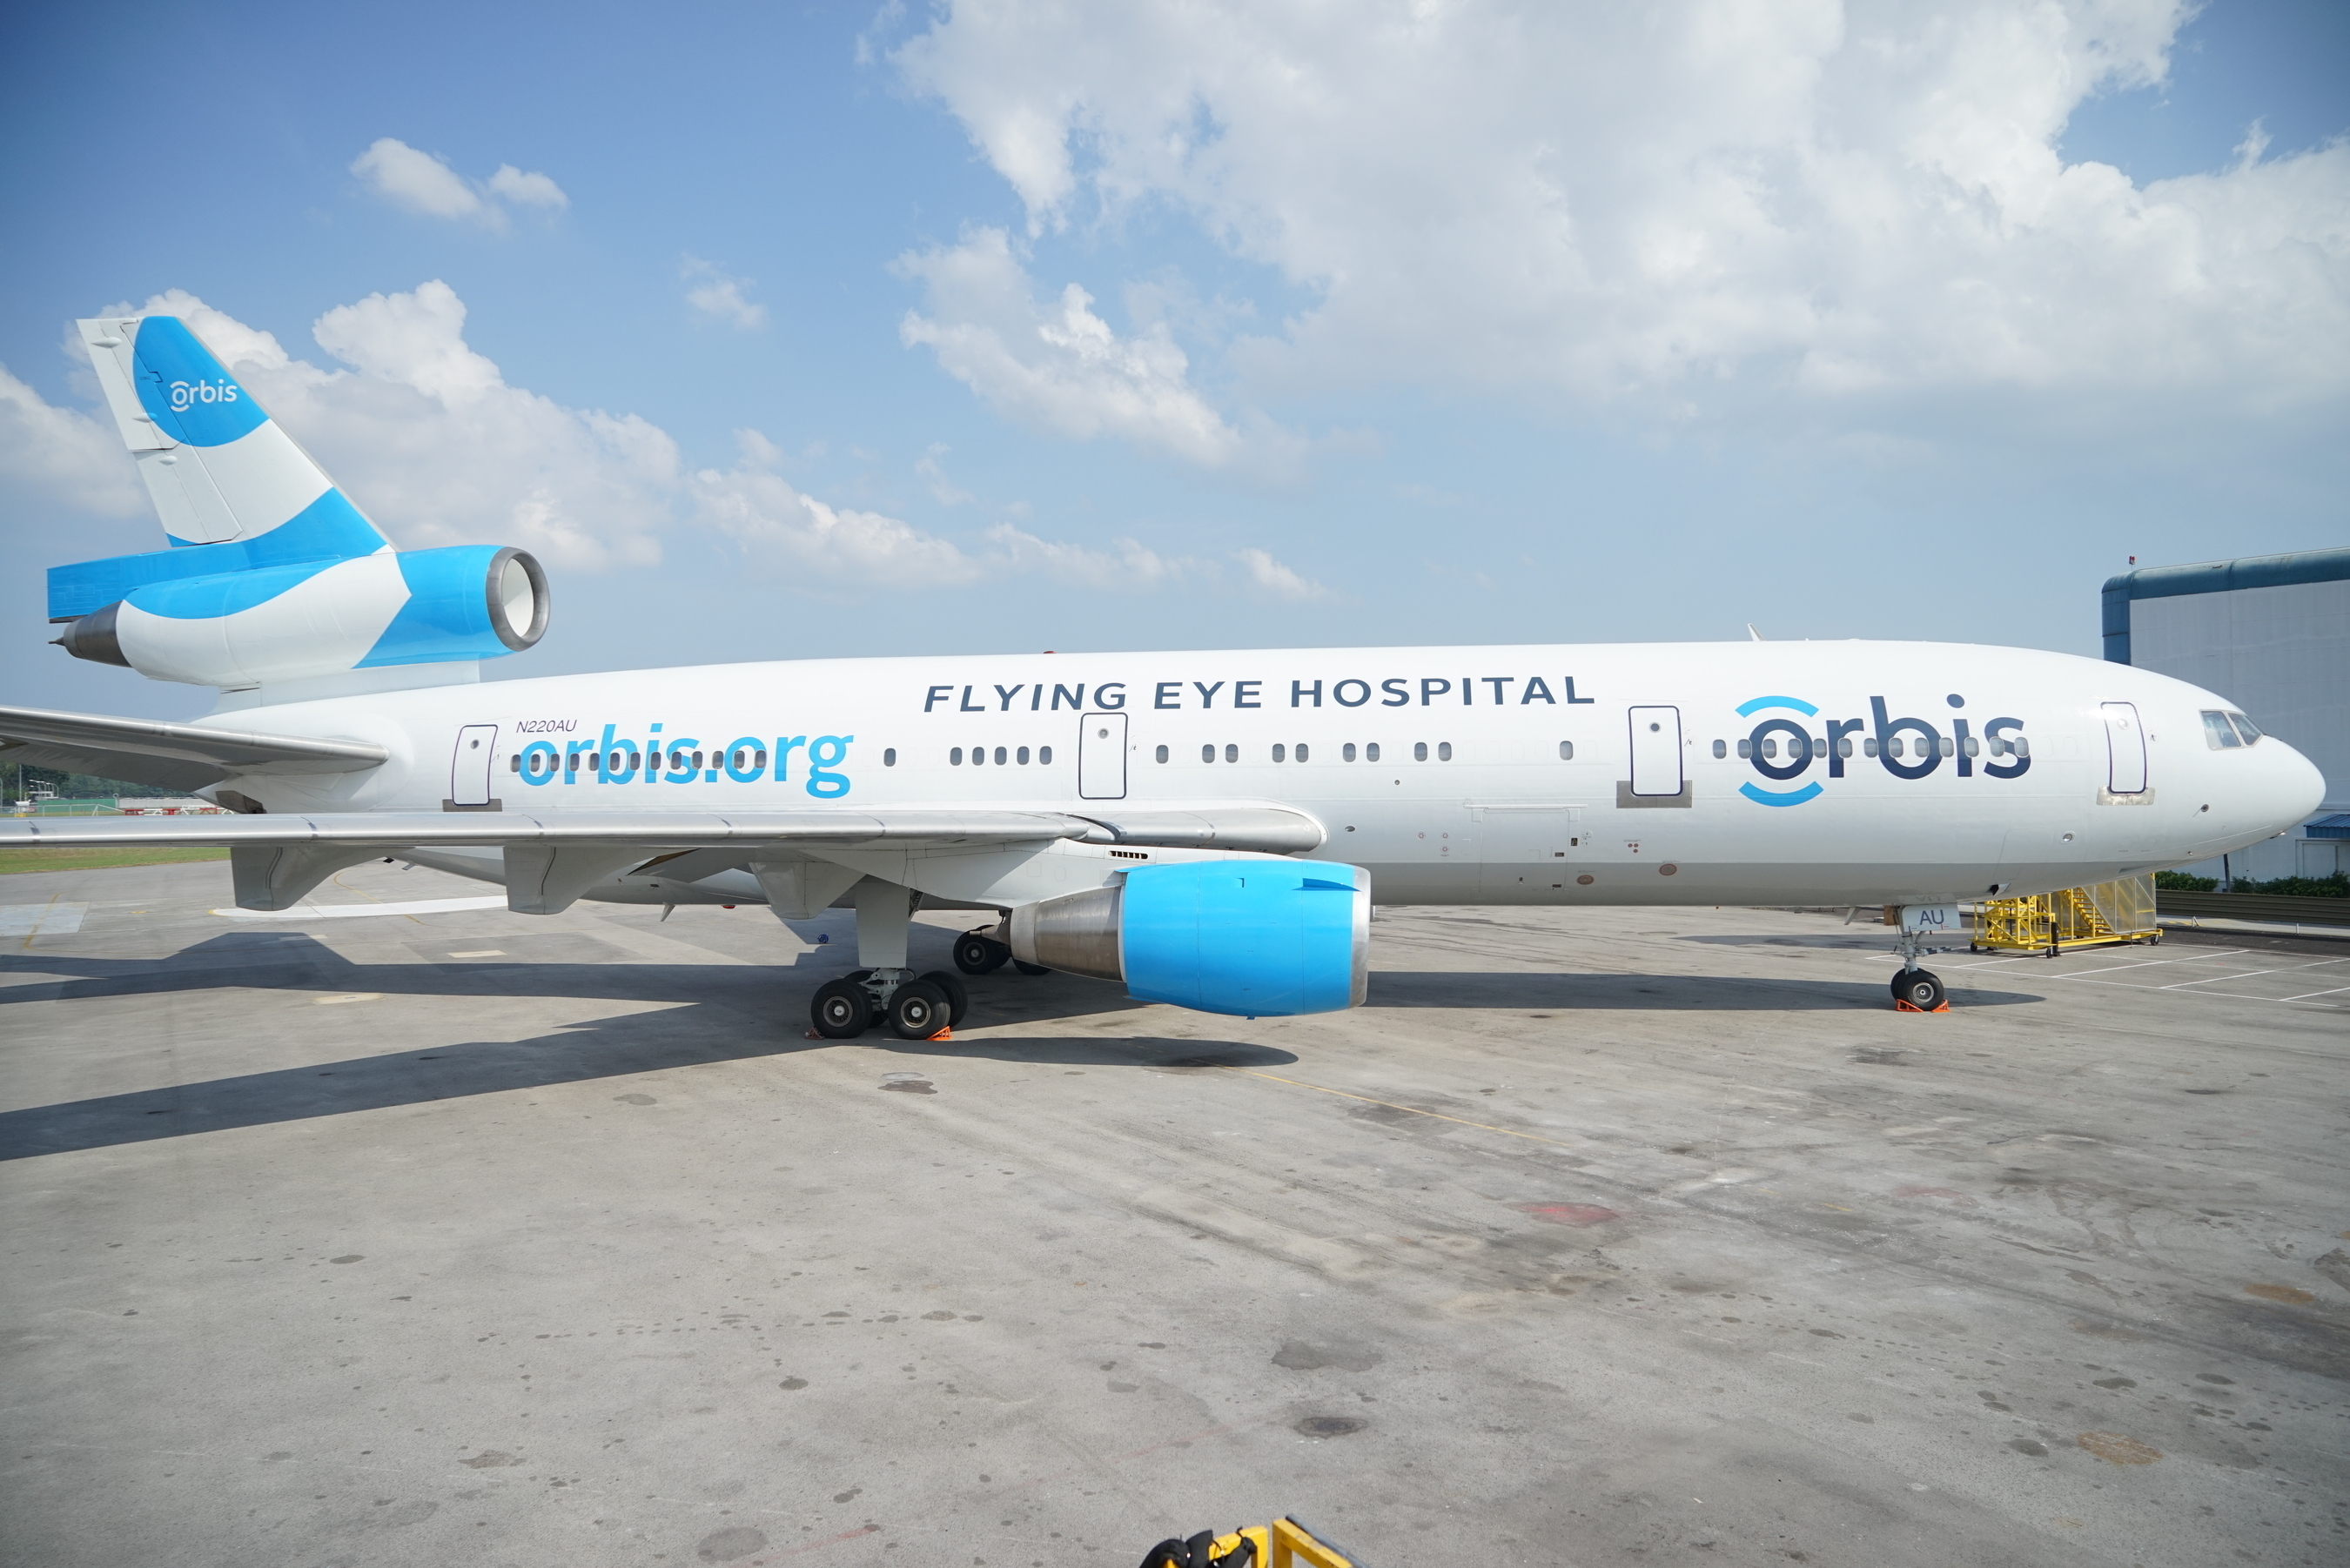 The new website features a special section about Orbis's Flying Eye Hospital, which allows visitors to experience a virtual tour of the aircraft. Learn more: www.orbis.org (PRNewsFoto/Orbis)